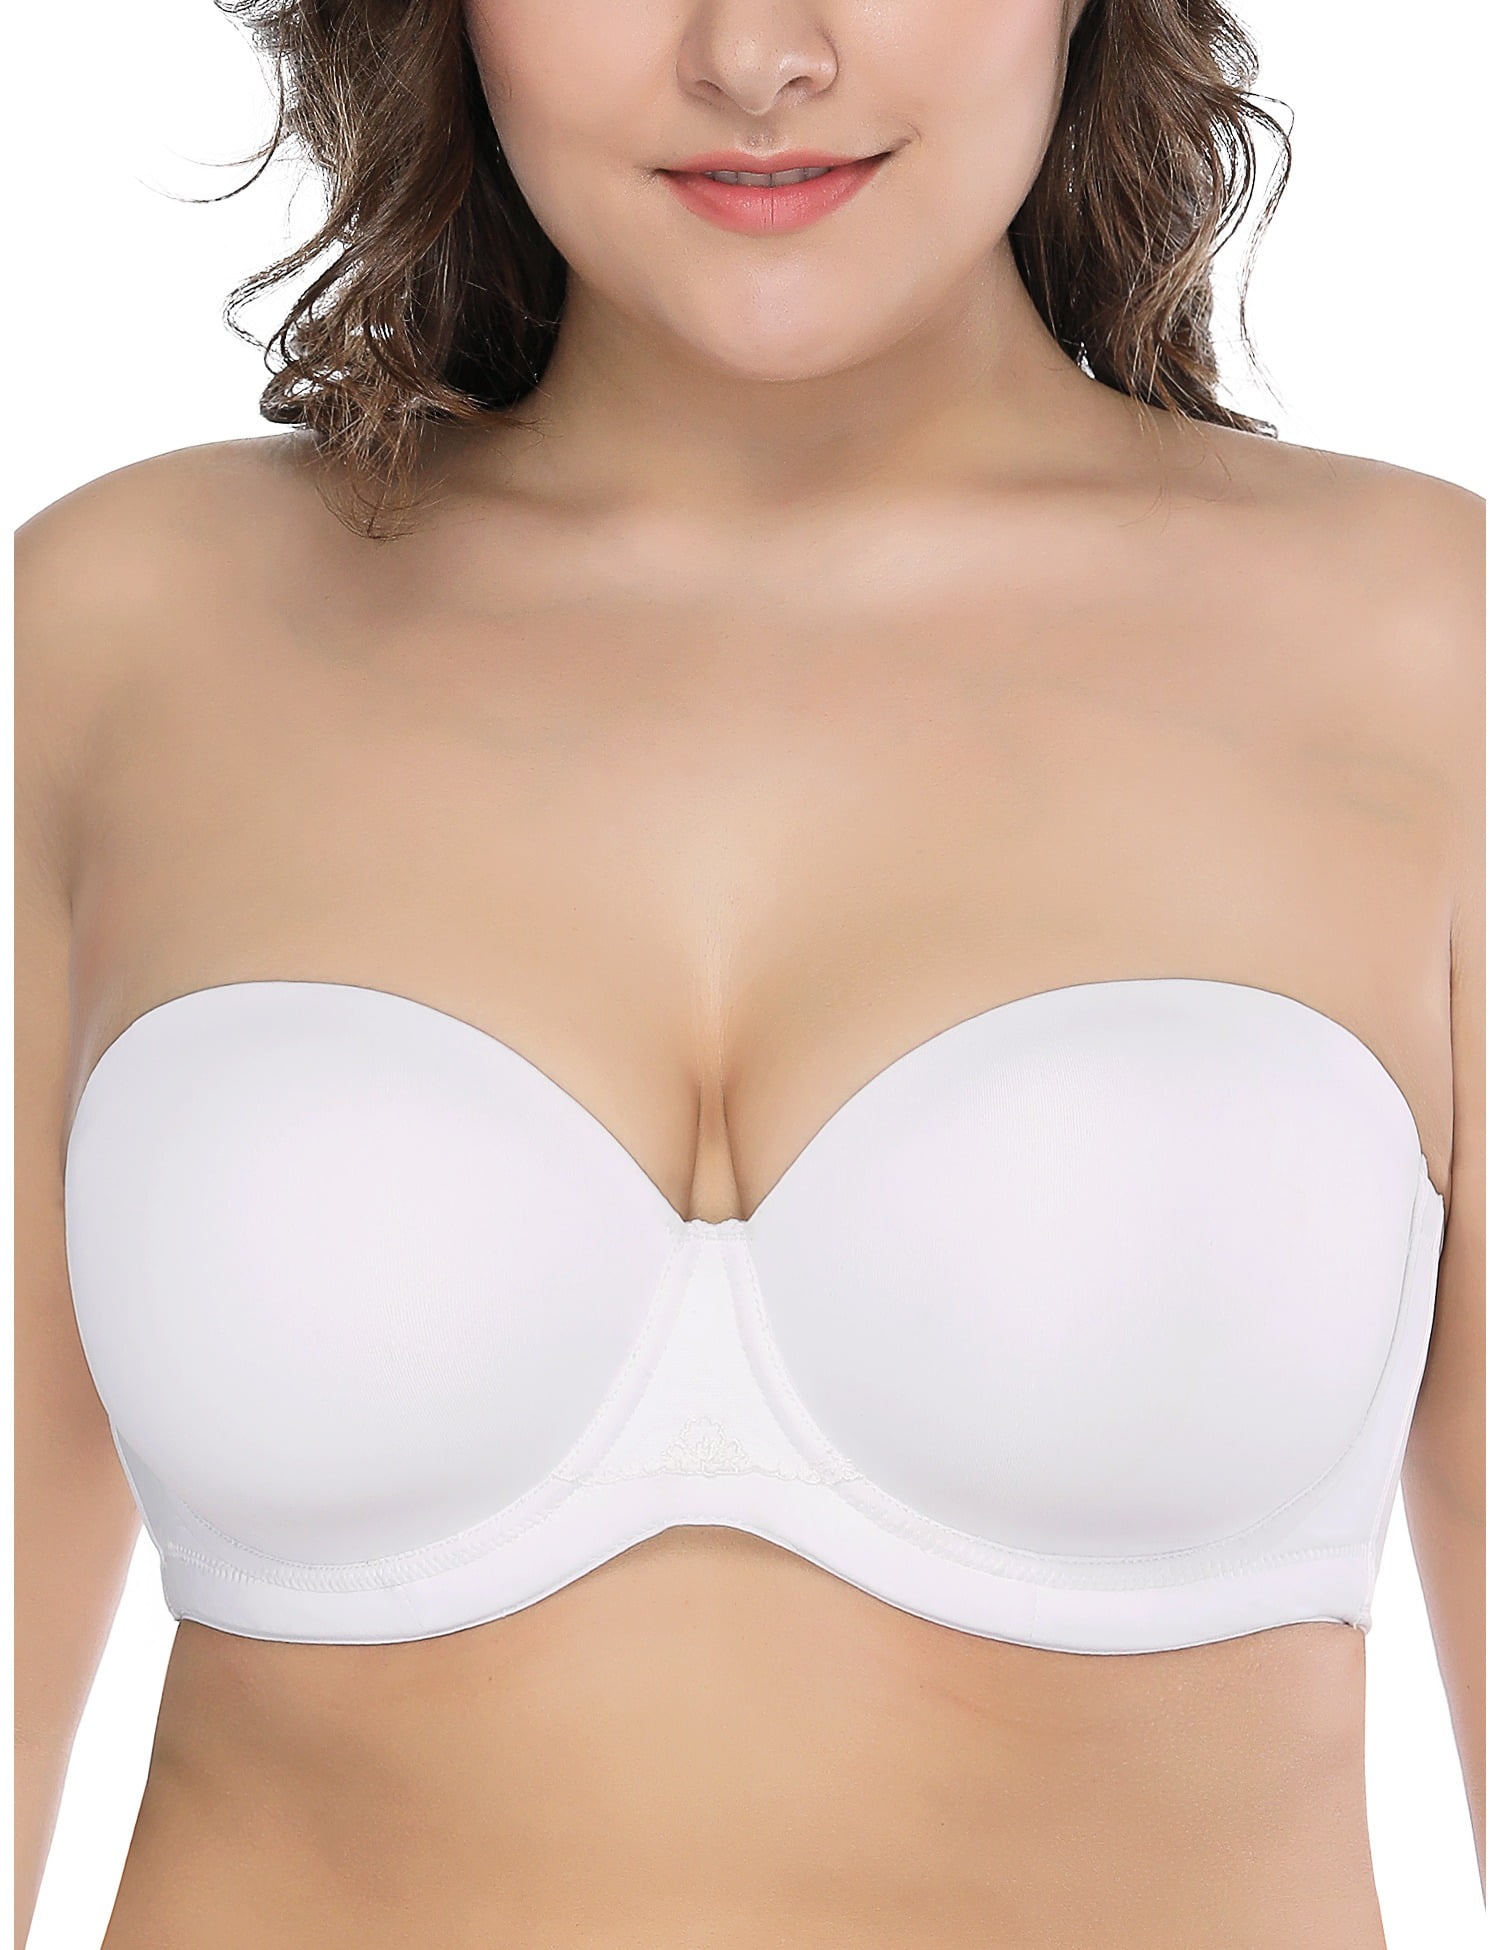 Deyllo Women's Strapless Push Up Full Cup Plus Size Underwire Padded Bra,  White 42D 